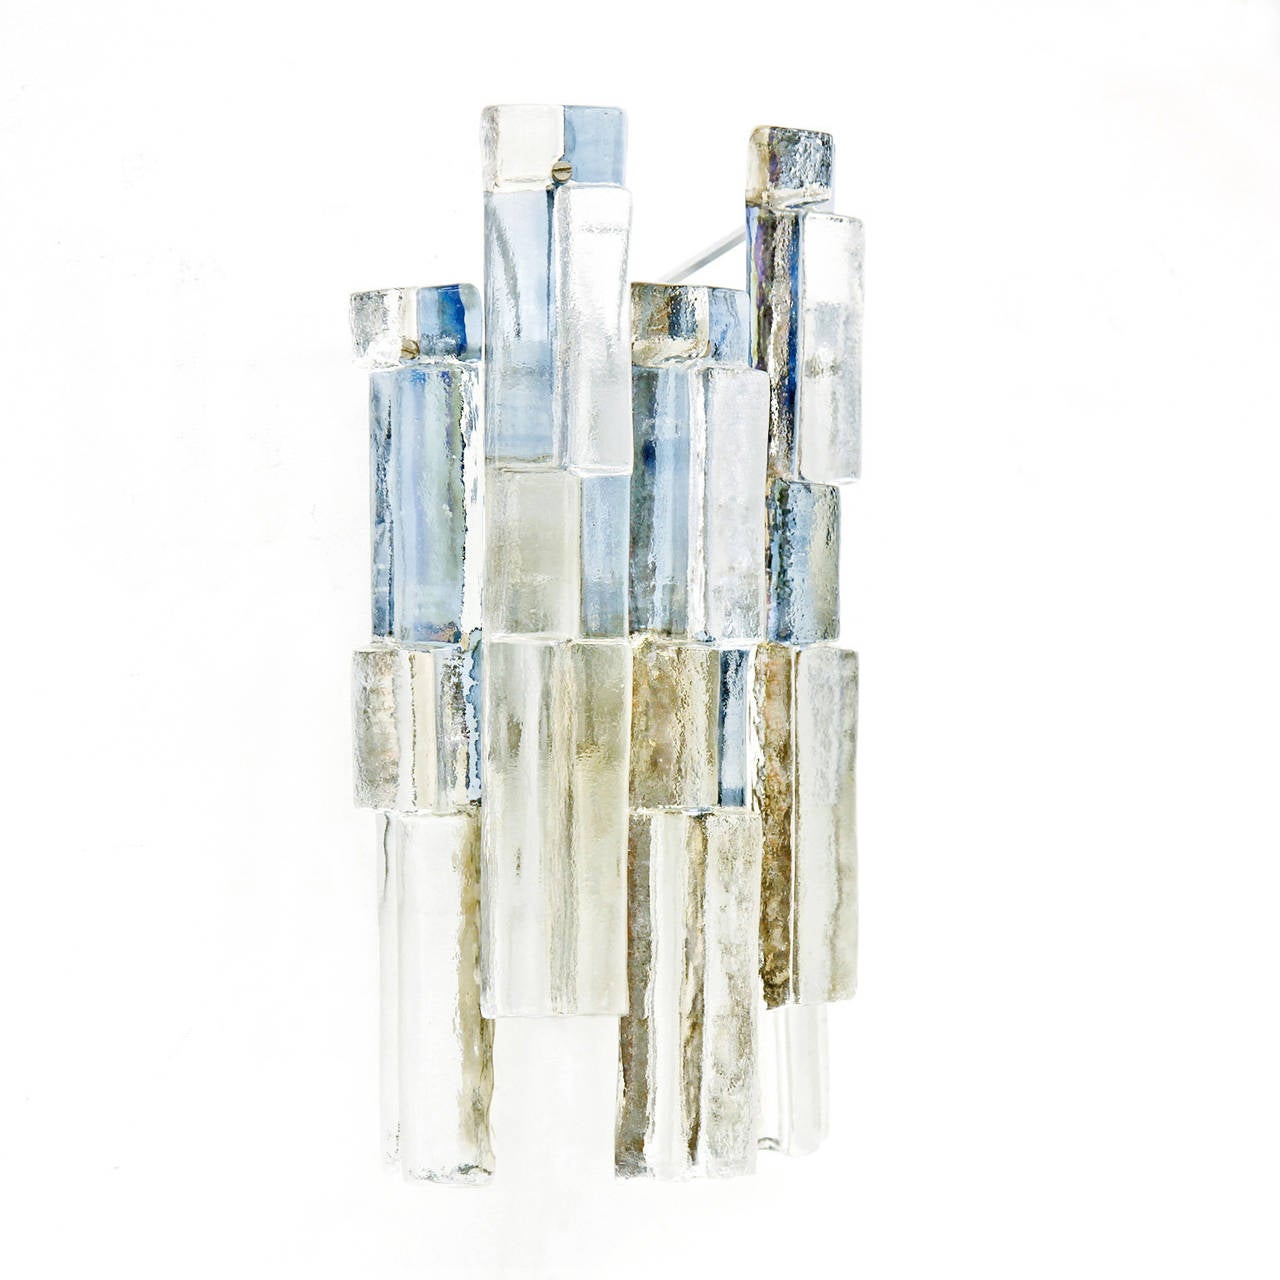 Excellent pair of Kalmar textured glass sconces, each consisting of 5 large iridescent coloured glass elements. The heavily textured glass pieces are mounted in alternating heights around white lacquered backplates with two E14 sockets per wall